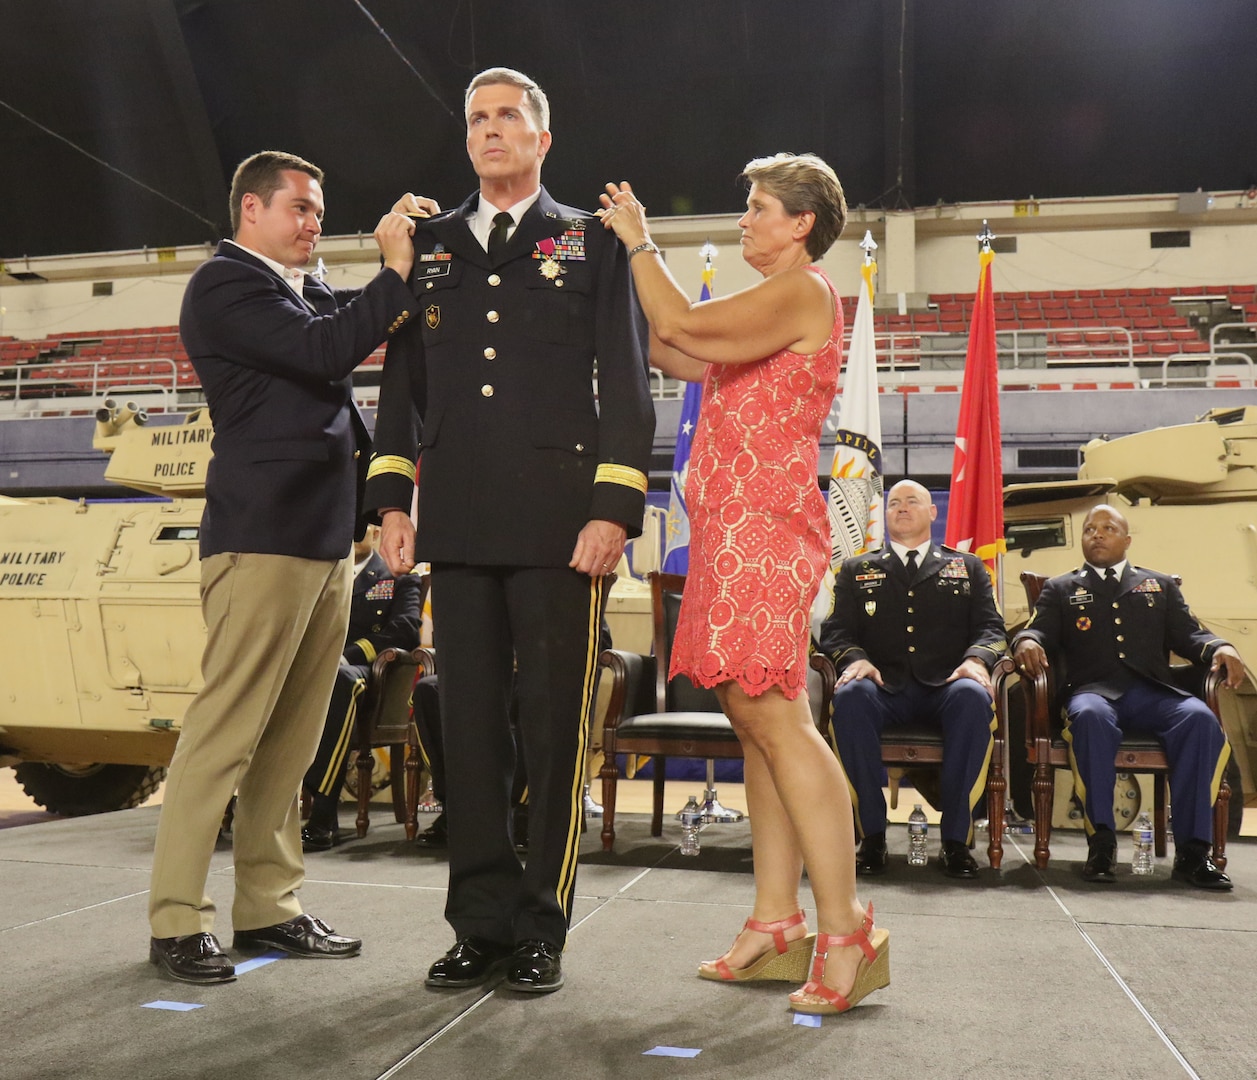 WASHINGTON- Members of Col. Robert K. Ryan's family pin on his new rank of brigadier general during a ceremony, June 10, 2018 at the District of Columbia Armory. Ryan is appointed Commander, Land Component Command, D.C. Army National Guard and will be responsible for strategic leadership and policies that affect all Army Soldiers in the D.C. National Guard, and for mission readiness of units assigned to the Land Component Command. (U.S. Army National Guard photo by Sgt. Adrian Shelton/Released)